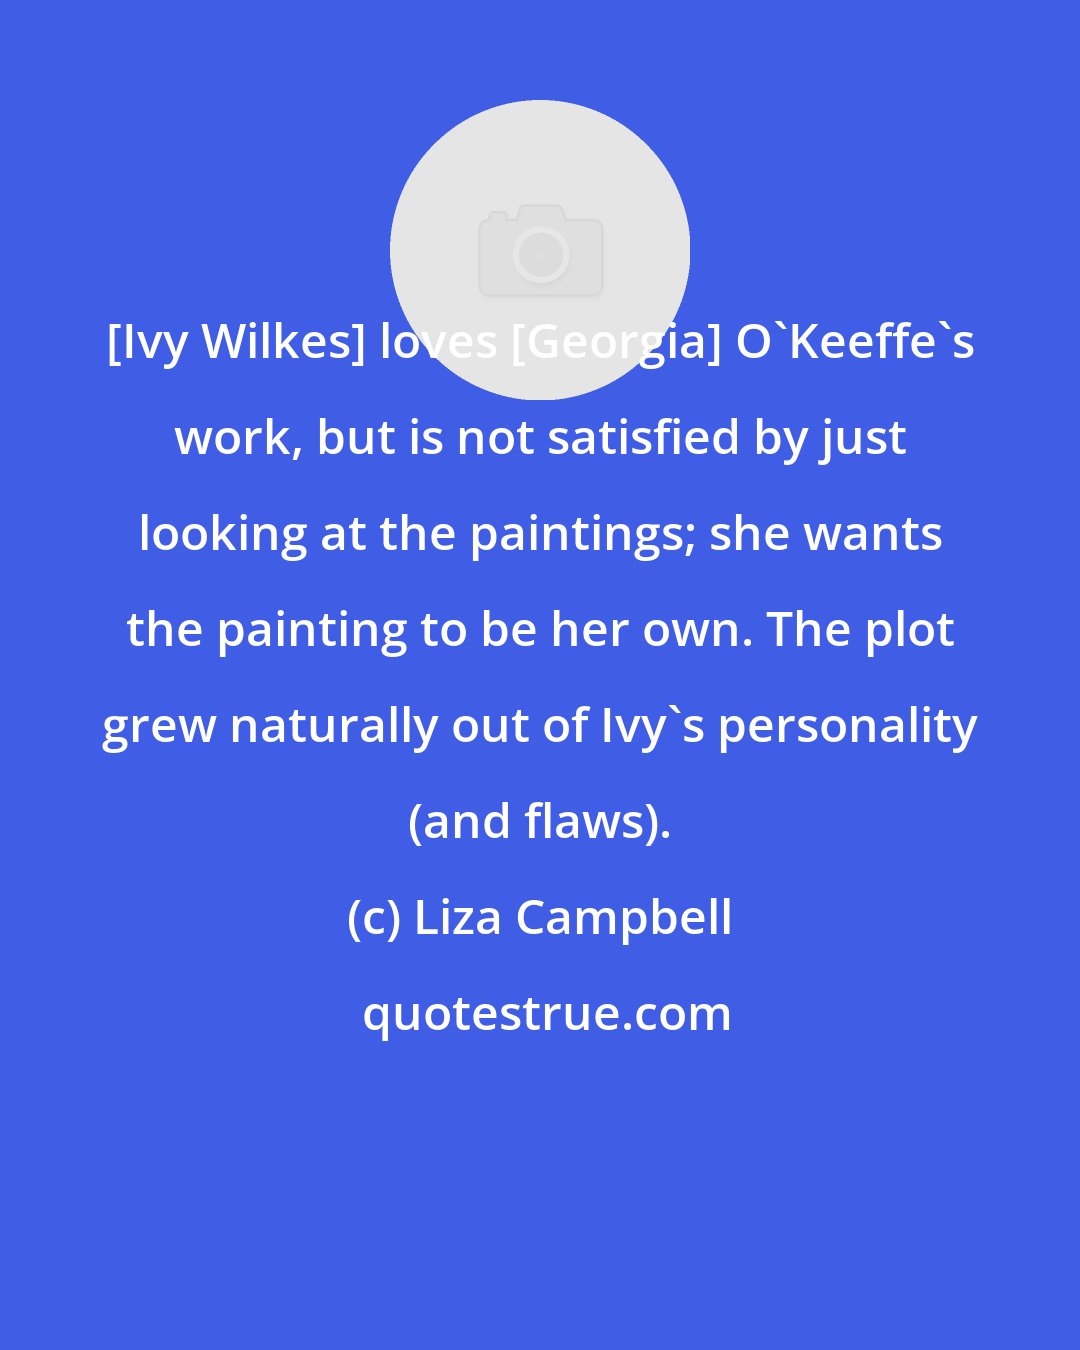 Liza Campbell: [Ivy Wilkes] loves [Georgia] O'Keeffe's work, but is not satisfied by just looking at the paintings; she wants the painting to be her own. The plot grew naturally out of Ivy's personality (and flaws).